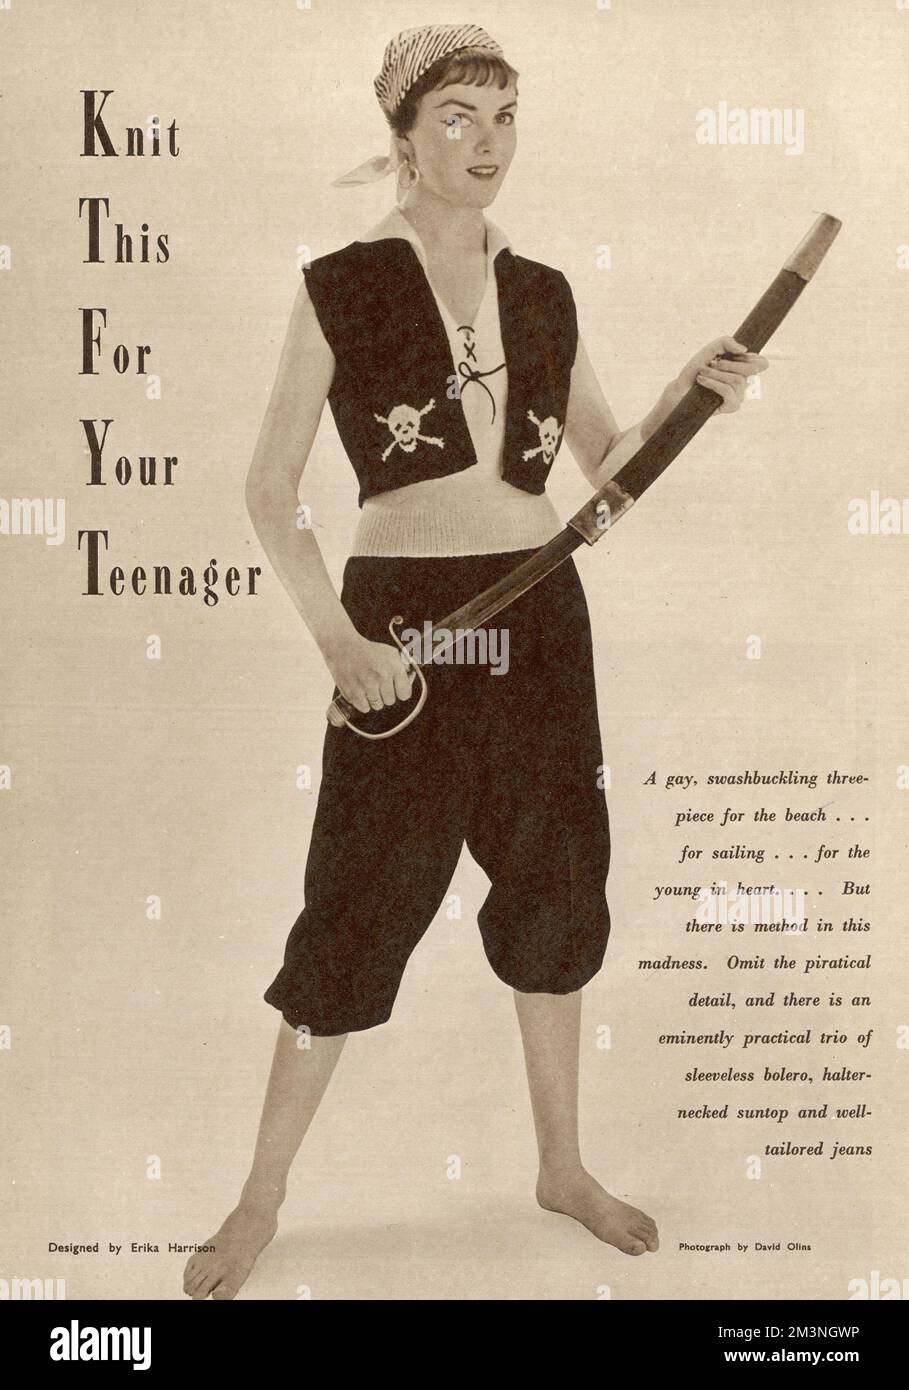 'A gay, swashbuckling three-piece' to knit for teenagers!  The 1950s were a more innocent time.     Date: 1954 Stock Photo